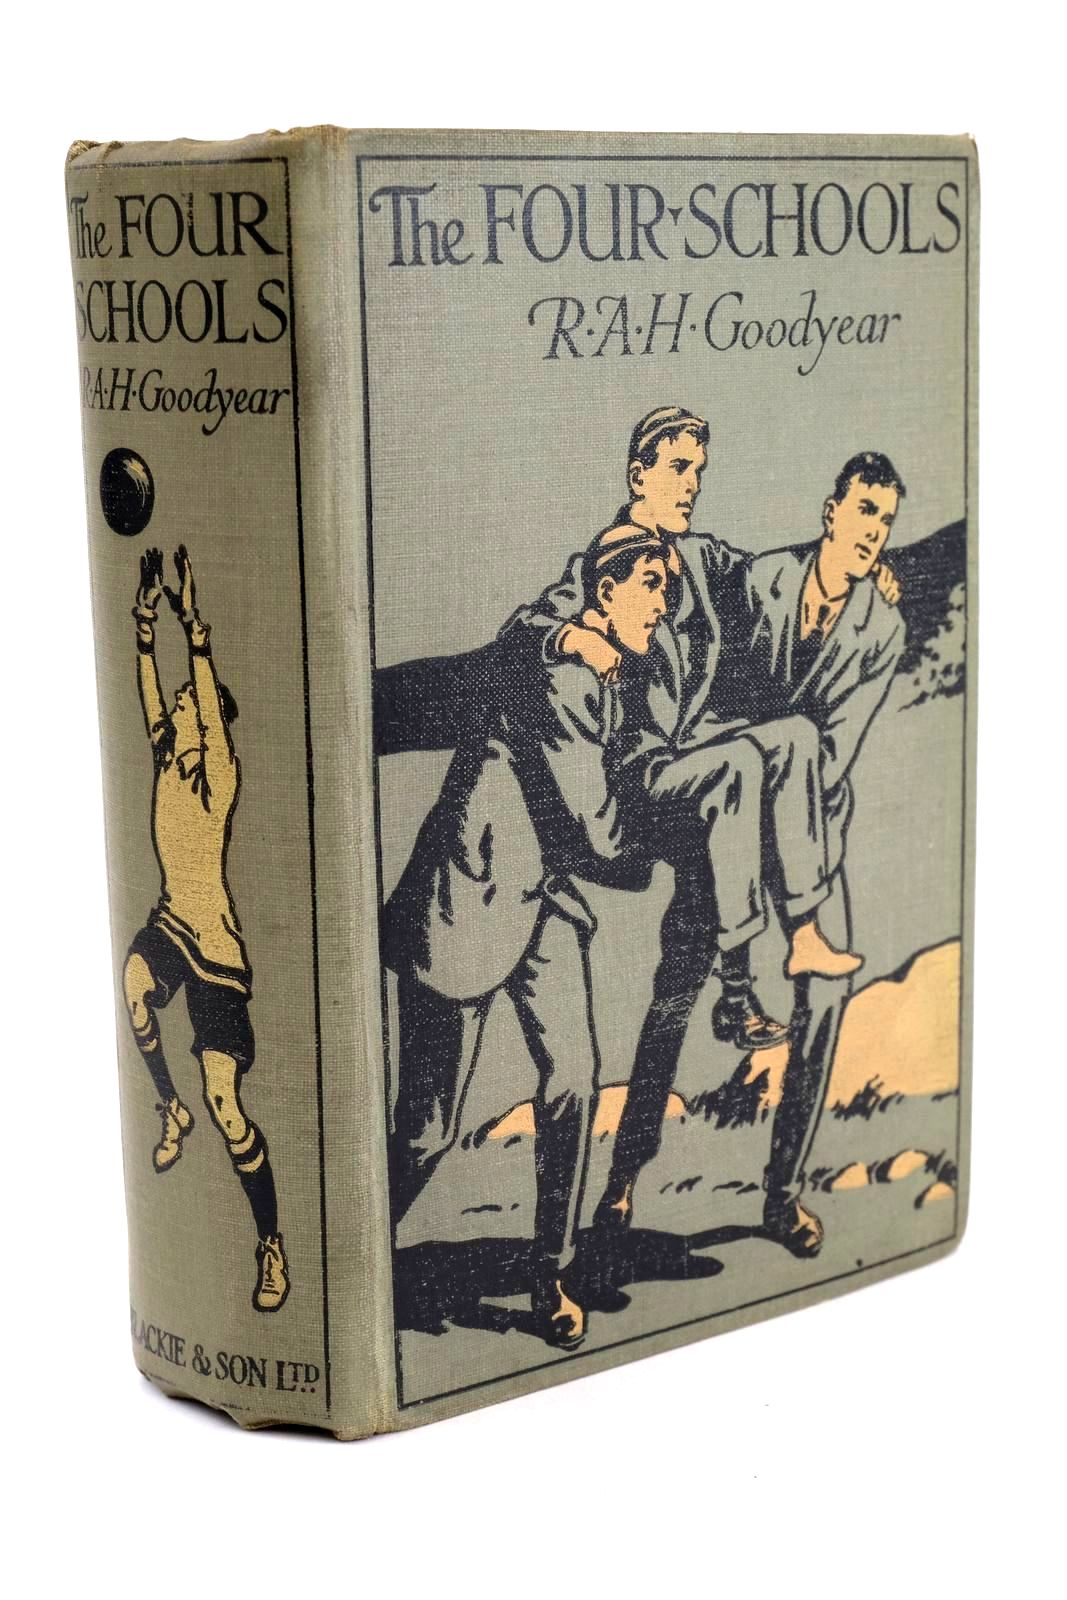 Photo of THE FOUR SCHOOLS written by Goodyear, R.A.H. illustrated by Whitwell, T.M.R. published by Blackie & Son Ltd. (STOCK CODE: 1324292)  for sale by Stella & Rose's Books